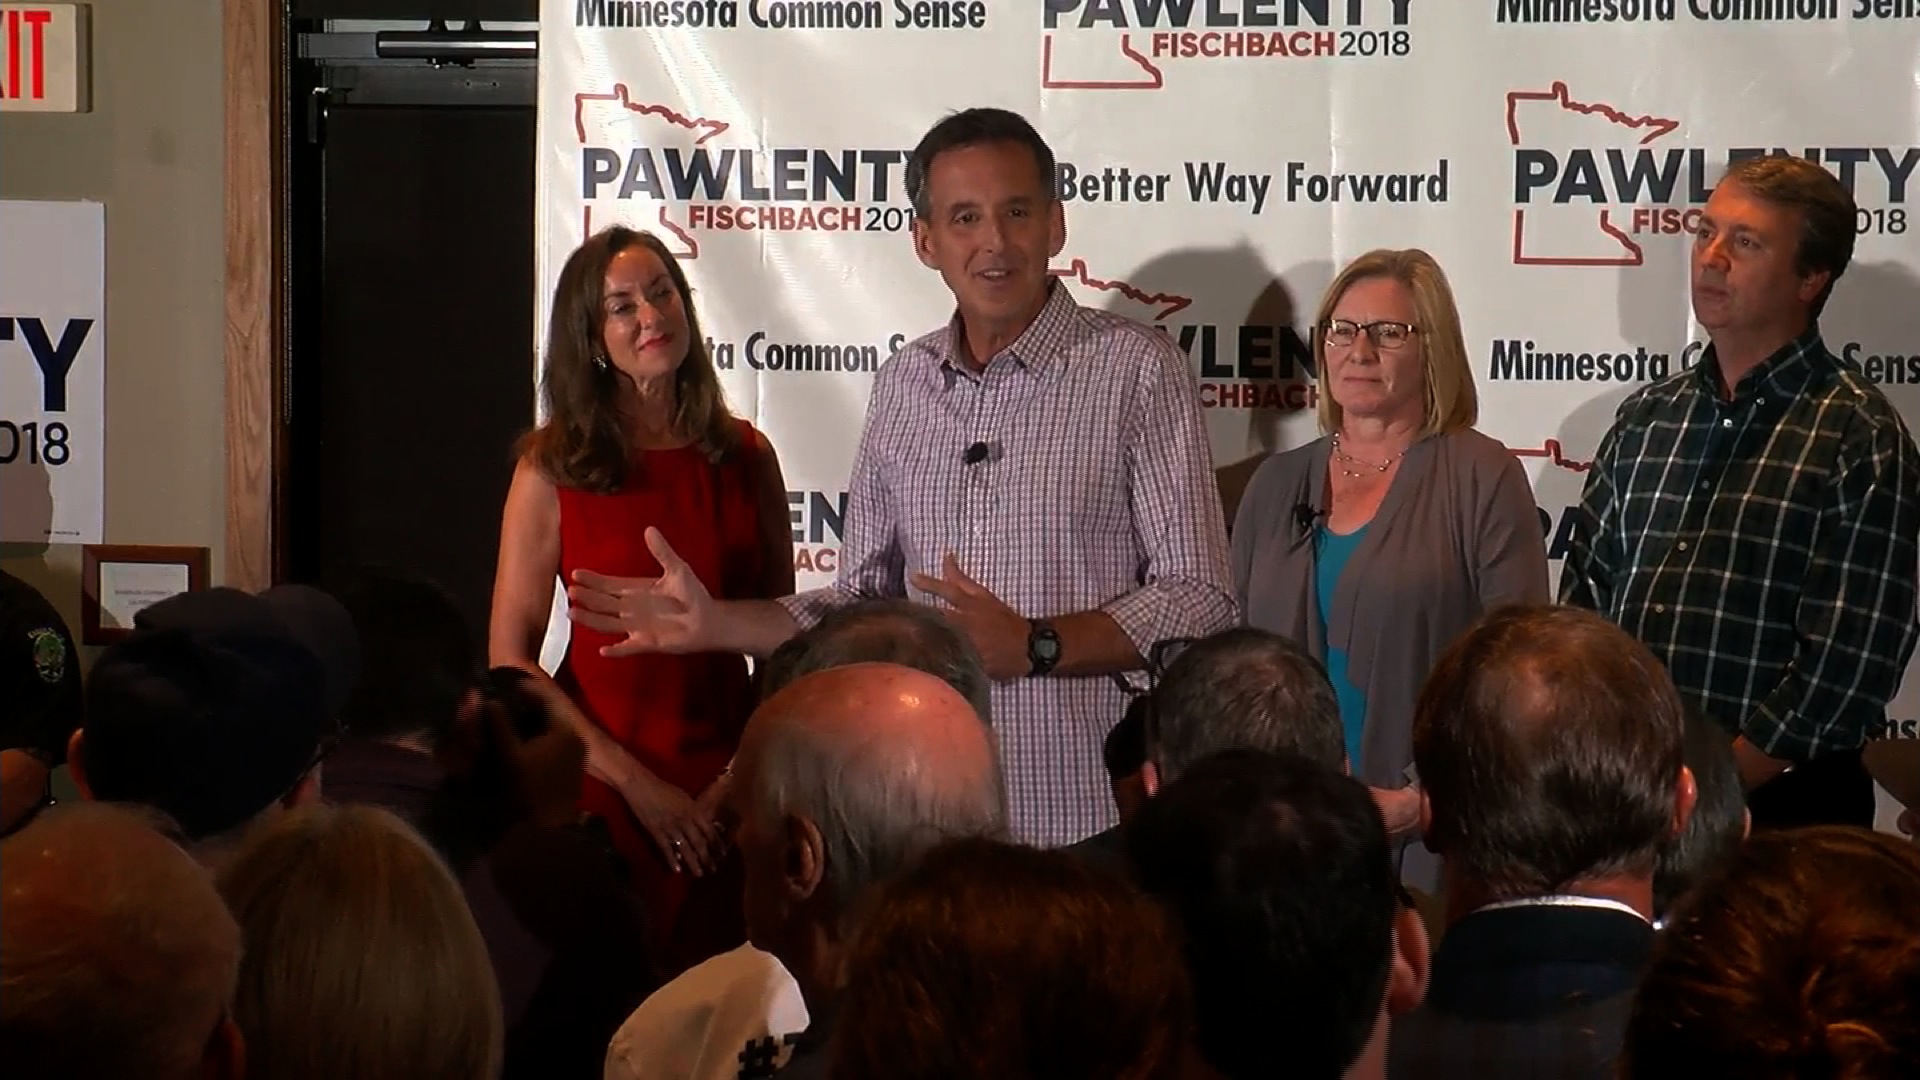 And this wonderful Tim Pawlenty could have been ours